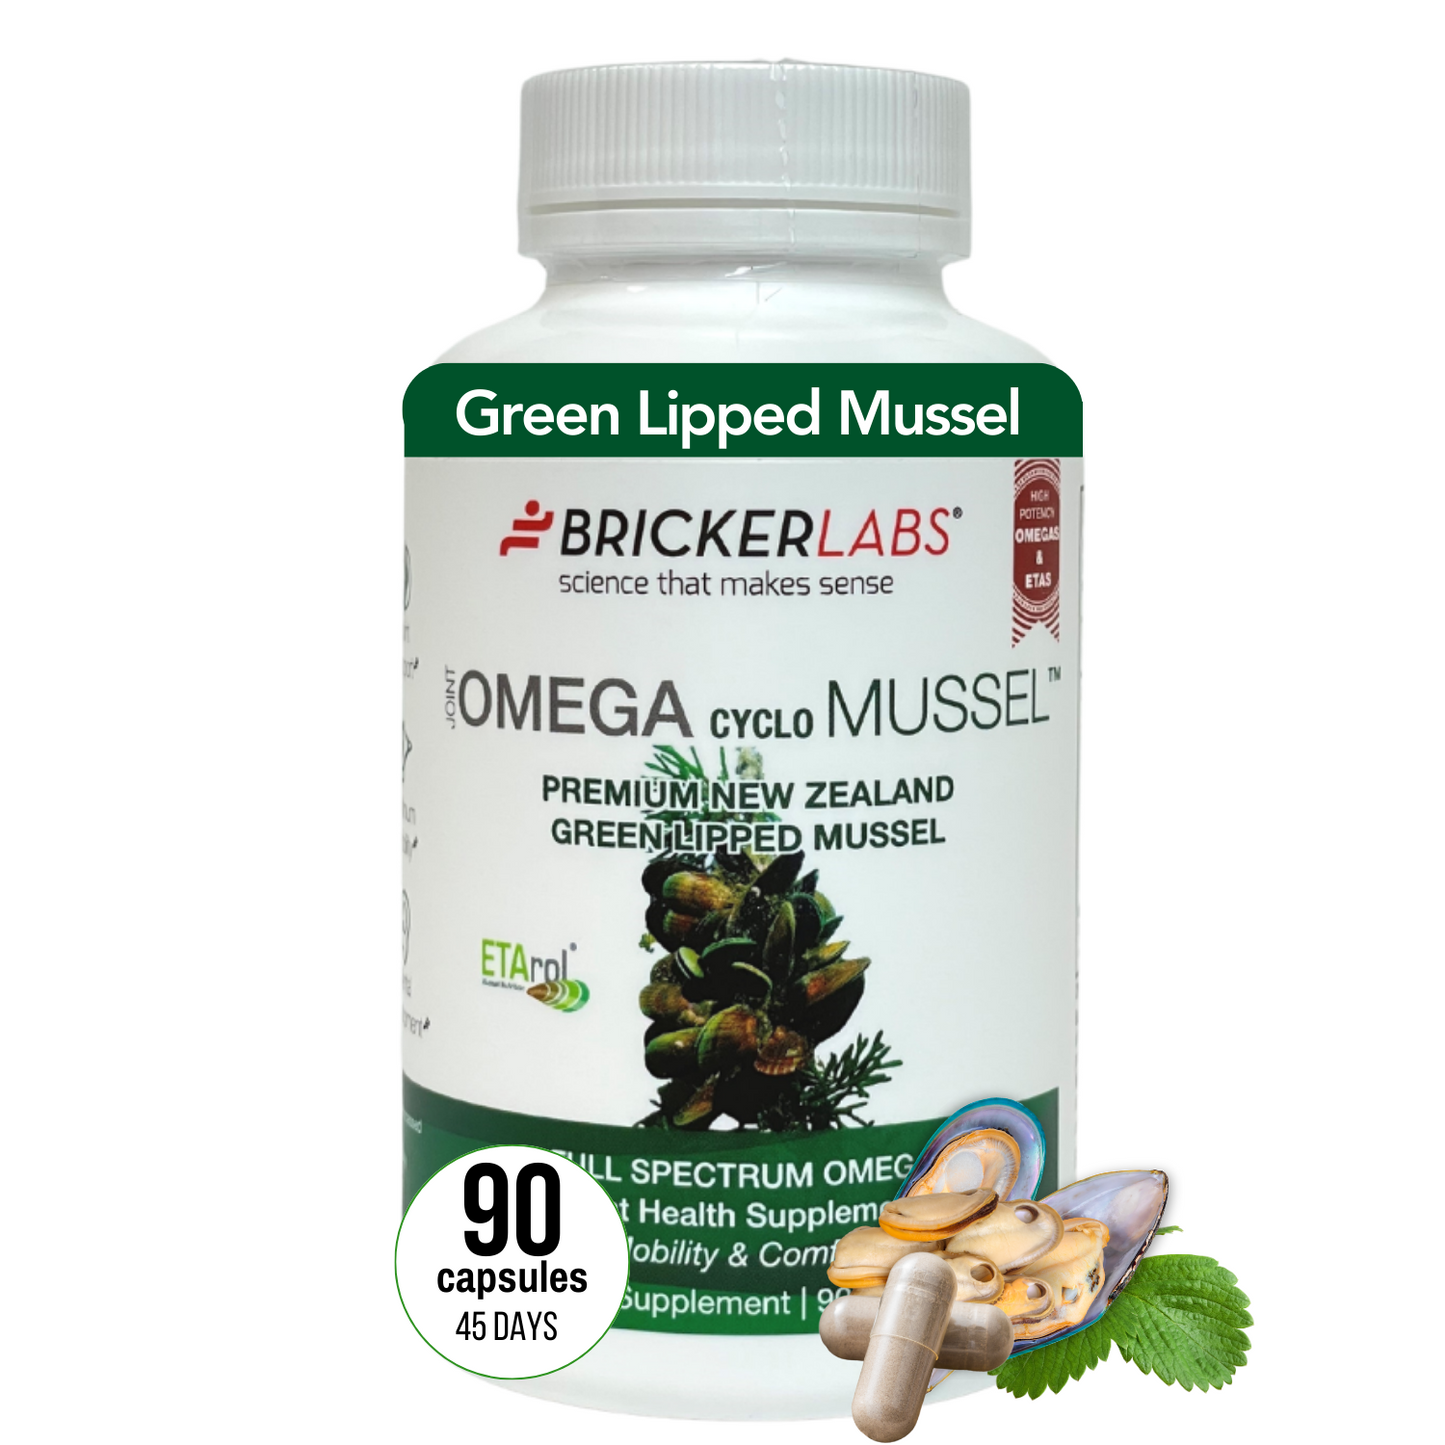 Omega Cyclo - Mussel │Premium New Zealand Green Lipped Mussel Joint Health Supplement